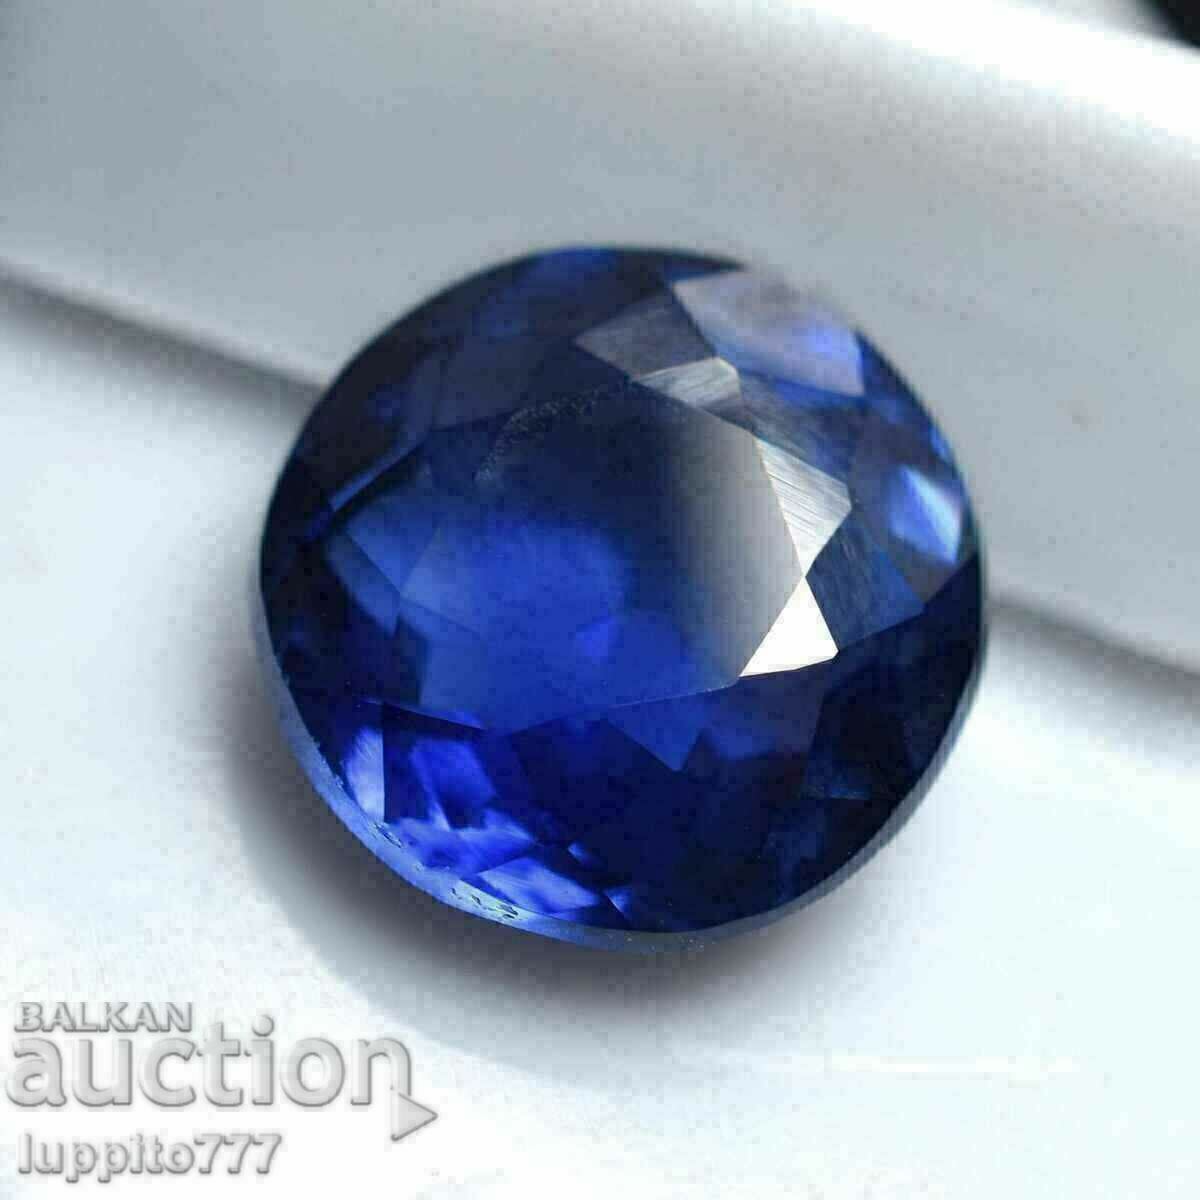 BZC!! 0.80 ct natural sapphire from 1 st.!!!